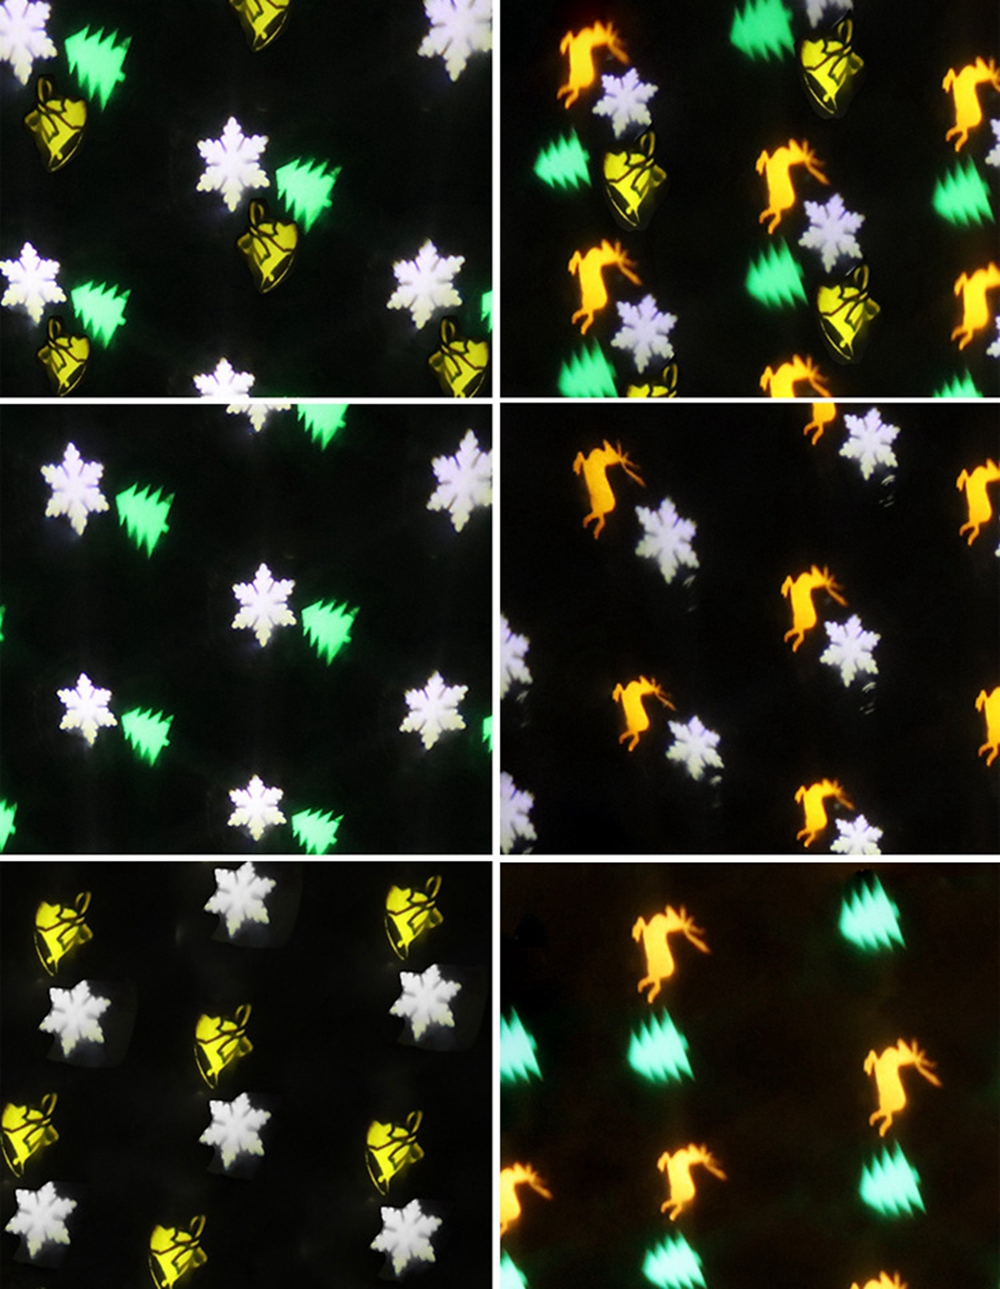 4-LED-Projection-Stage-Light-Outdoor-Christmas-Mini-Snowflake-Lamp-with-Remote-Control-for-Party-Fes-1534747-9